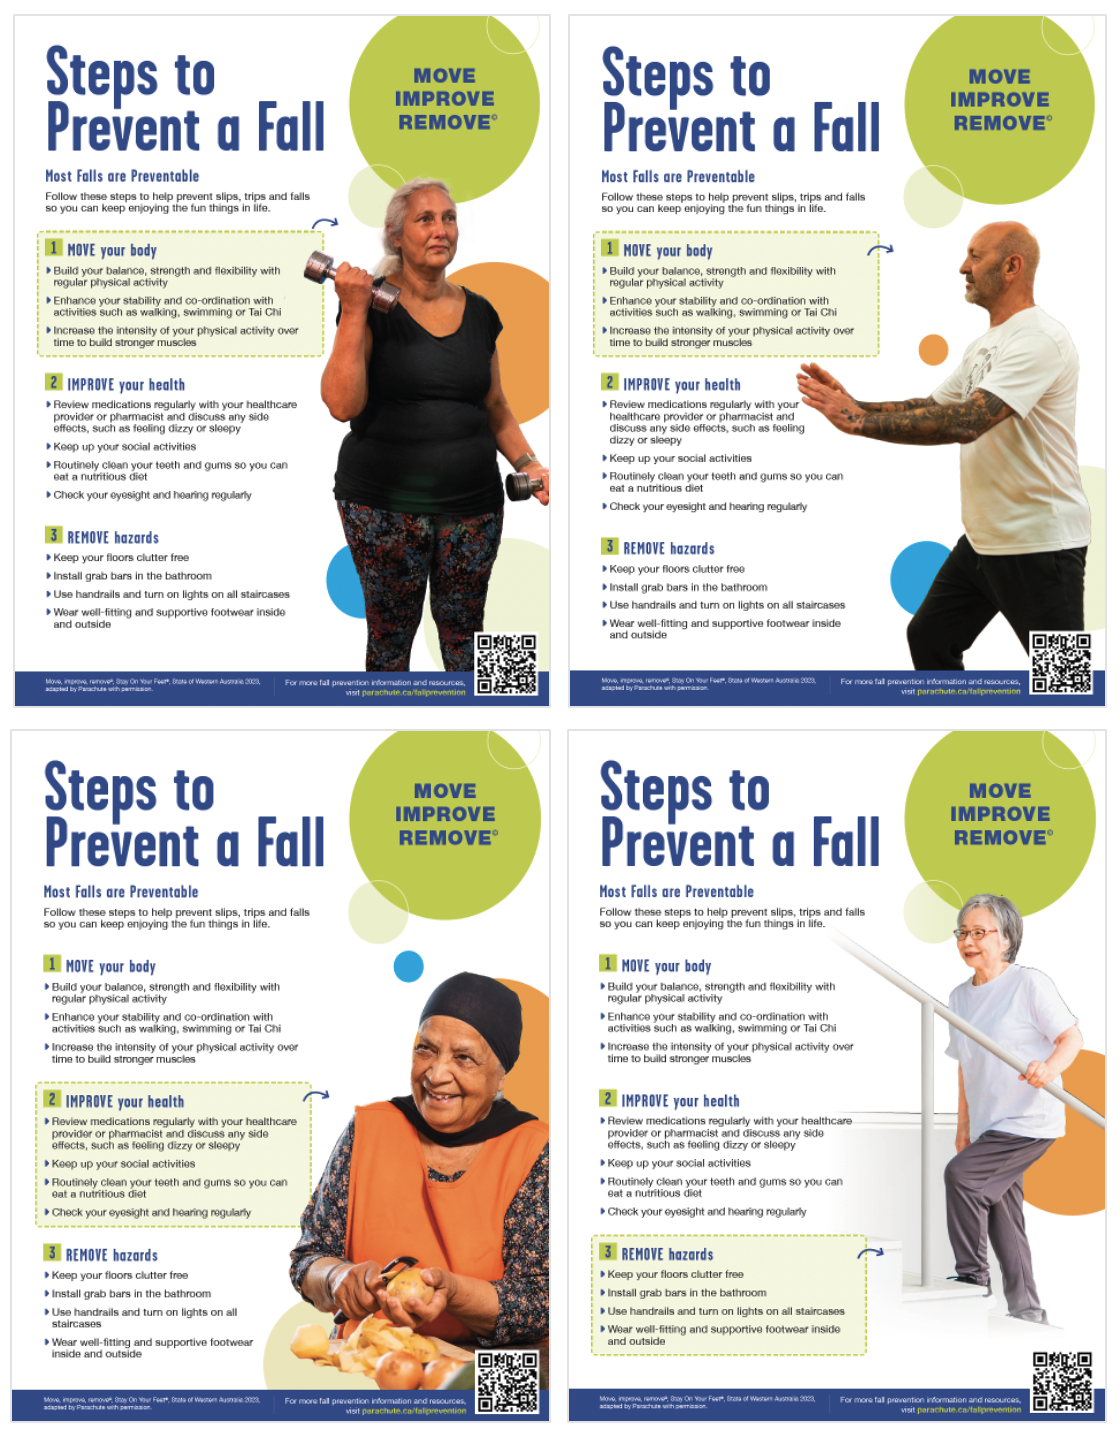 Fall Prevention Month: 6 Ways Prevent a Fall